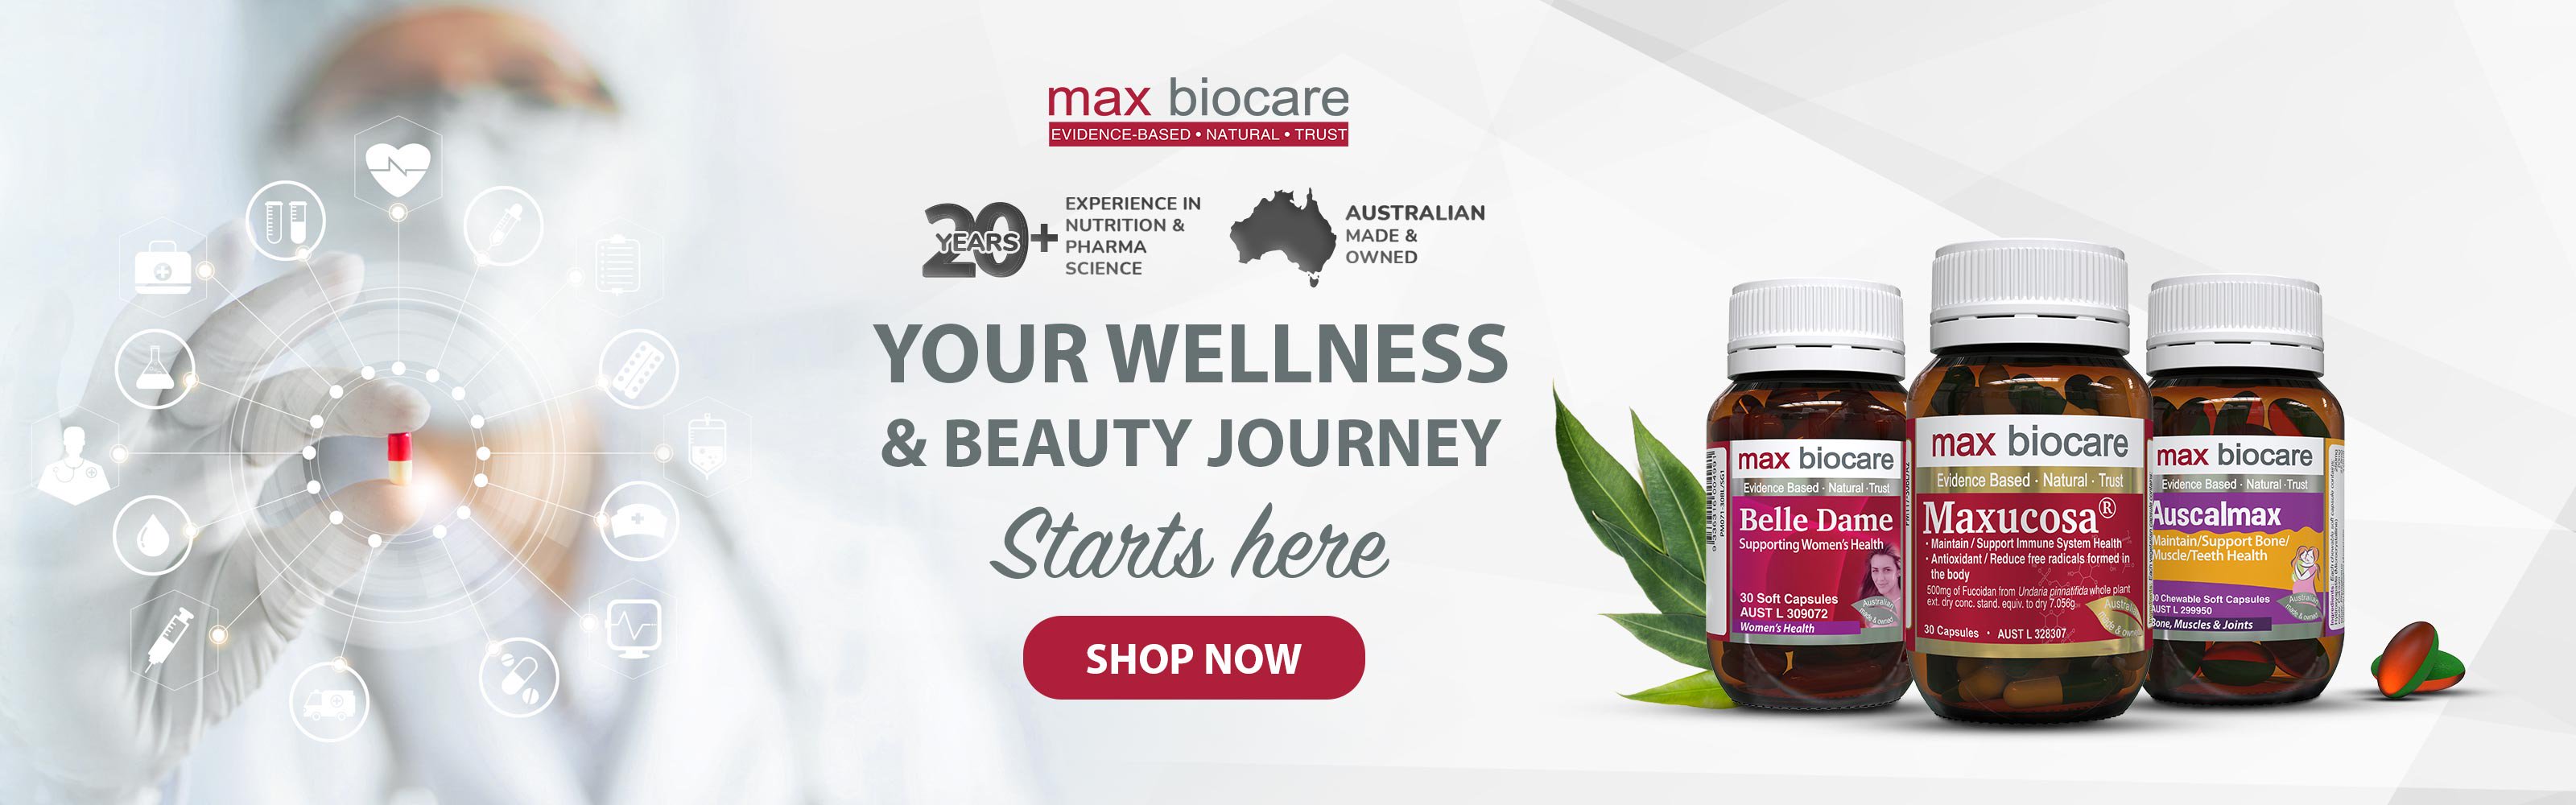 Max Biocare - Your Wellness & Beauty Journey Starts Here